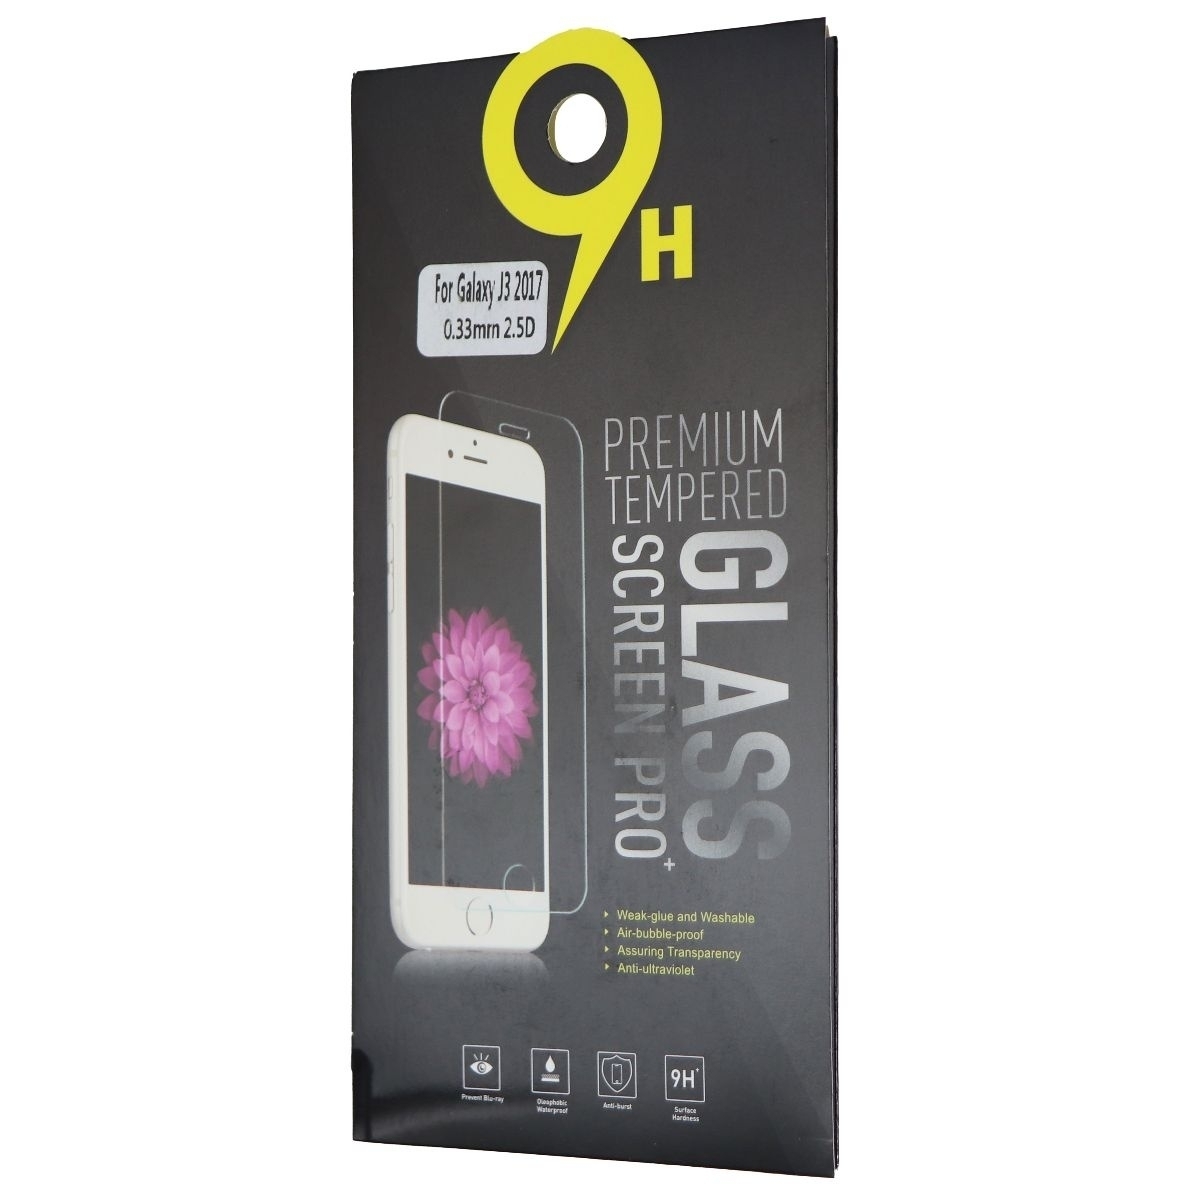 9H Premium Tempered Glass Screen Protector For Samsung Galaxy J3 (2017) - Clear